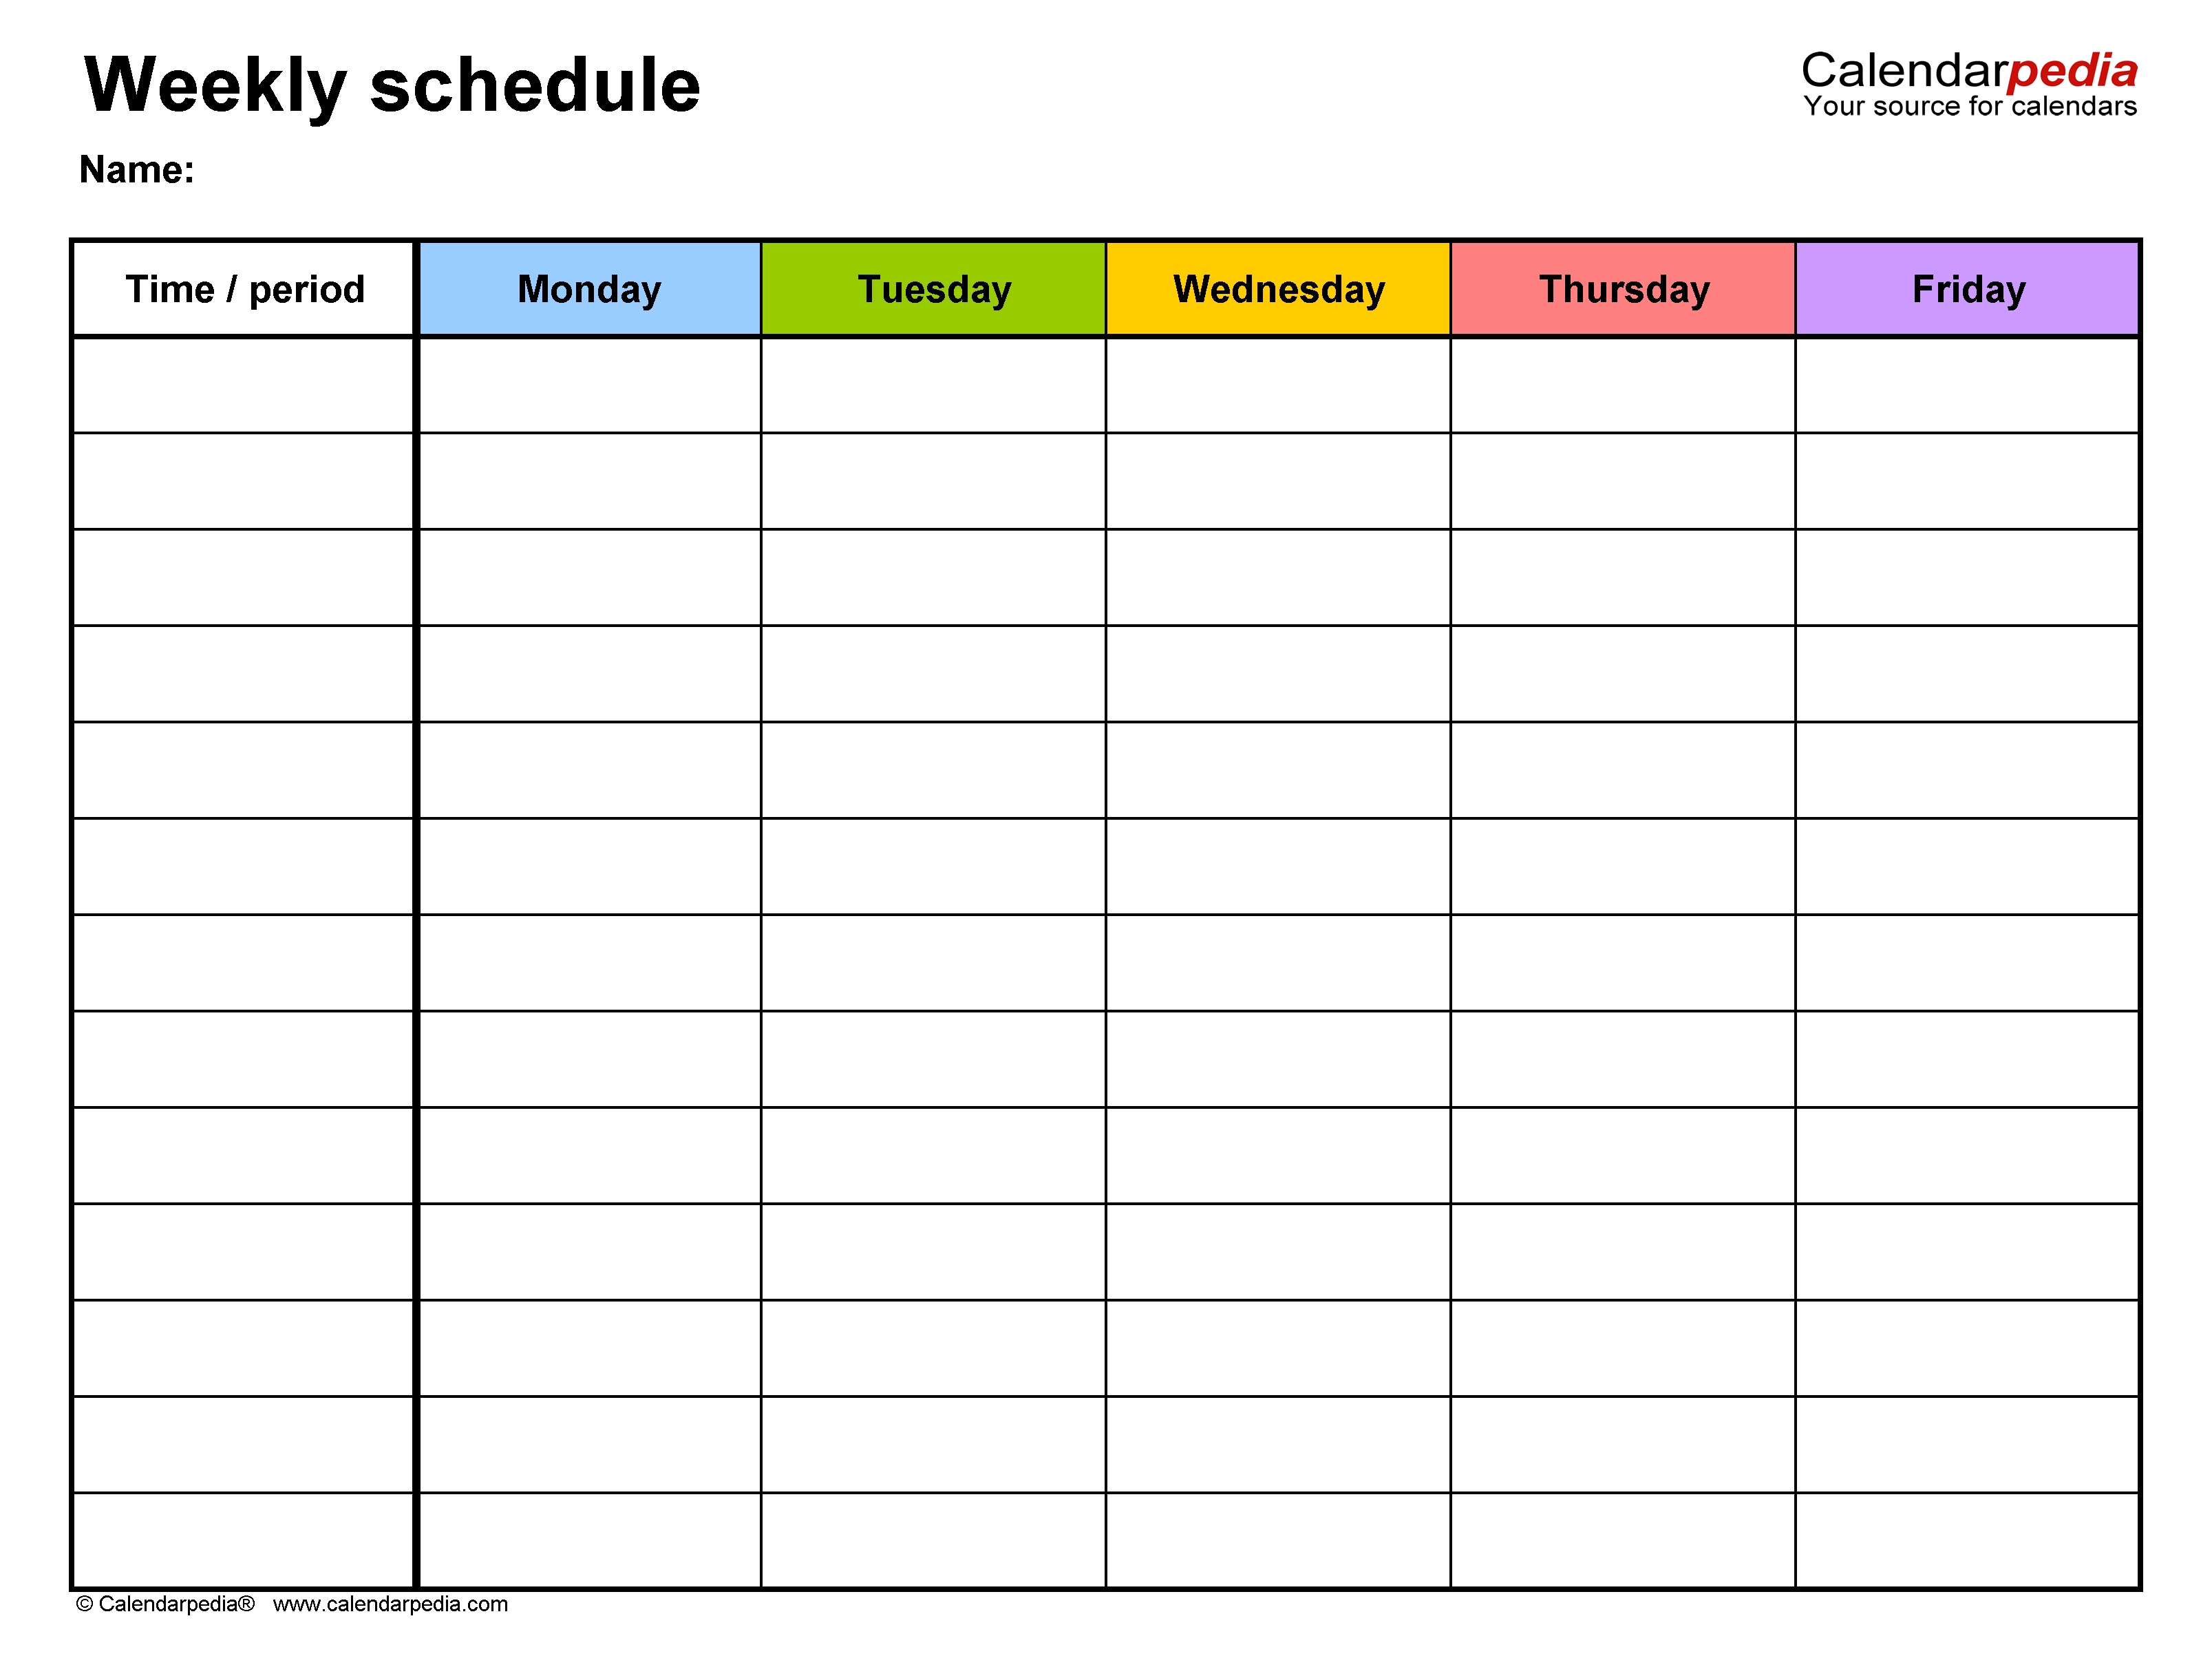 Free Weekly Schedules For Word - 18 Templates Calendar Template On Word